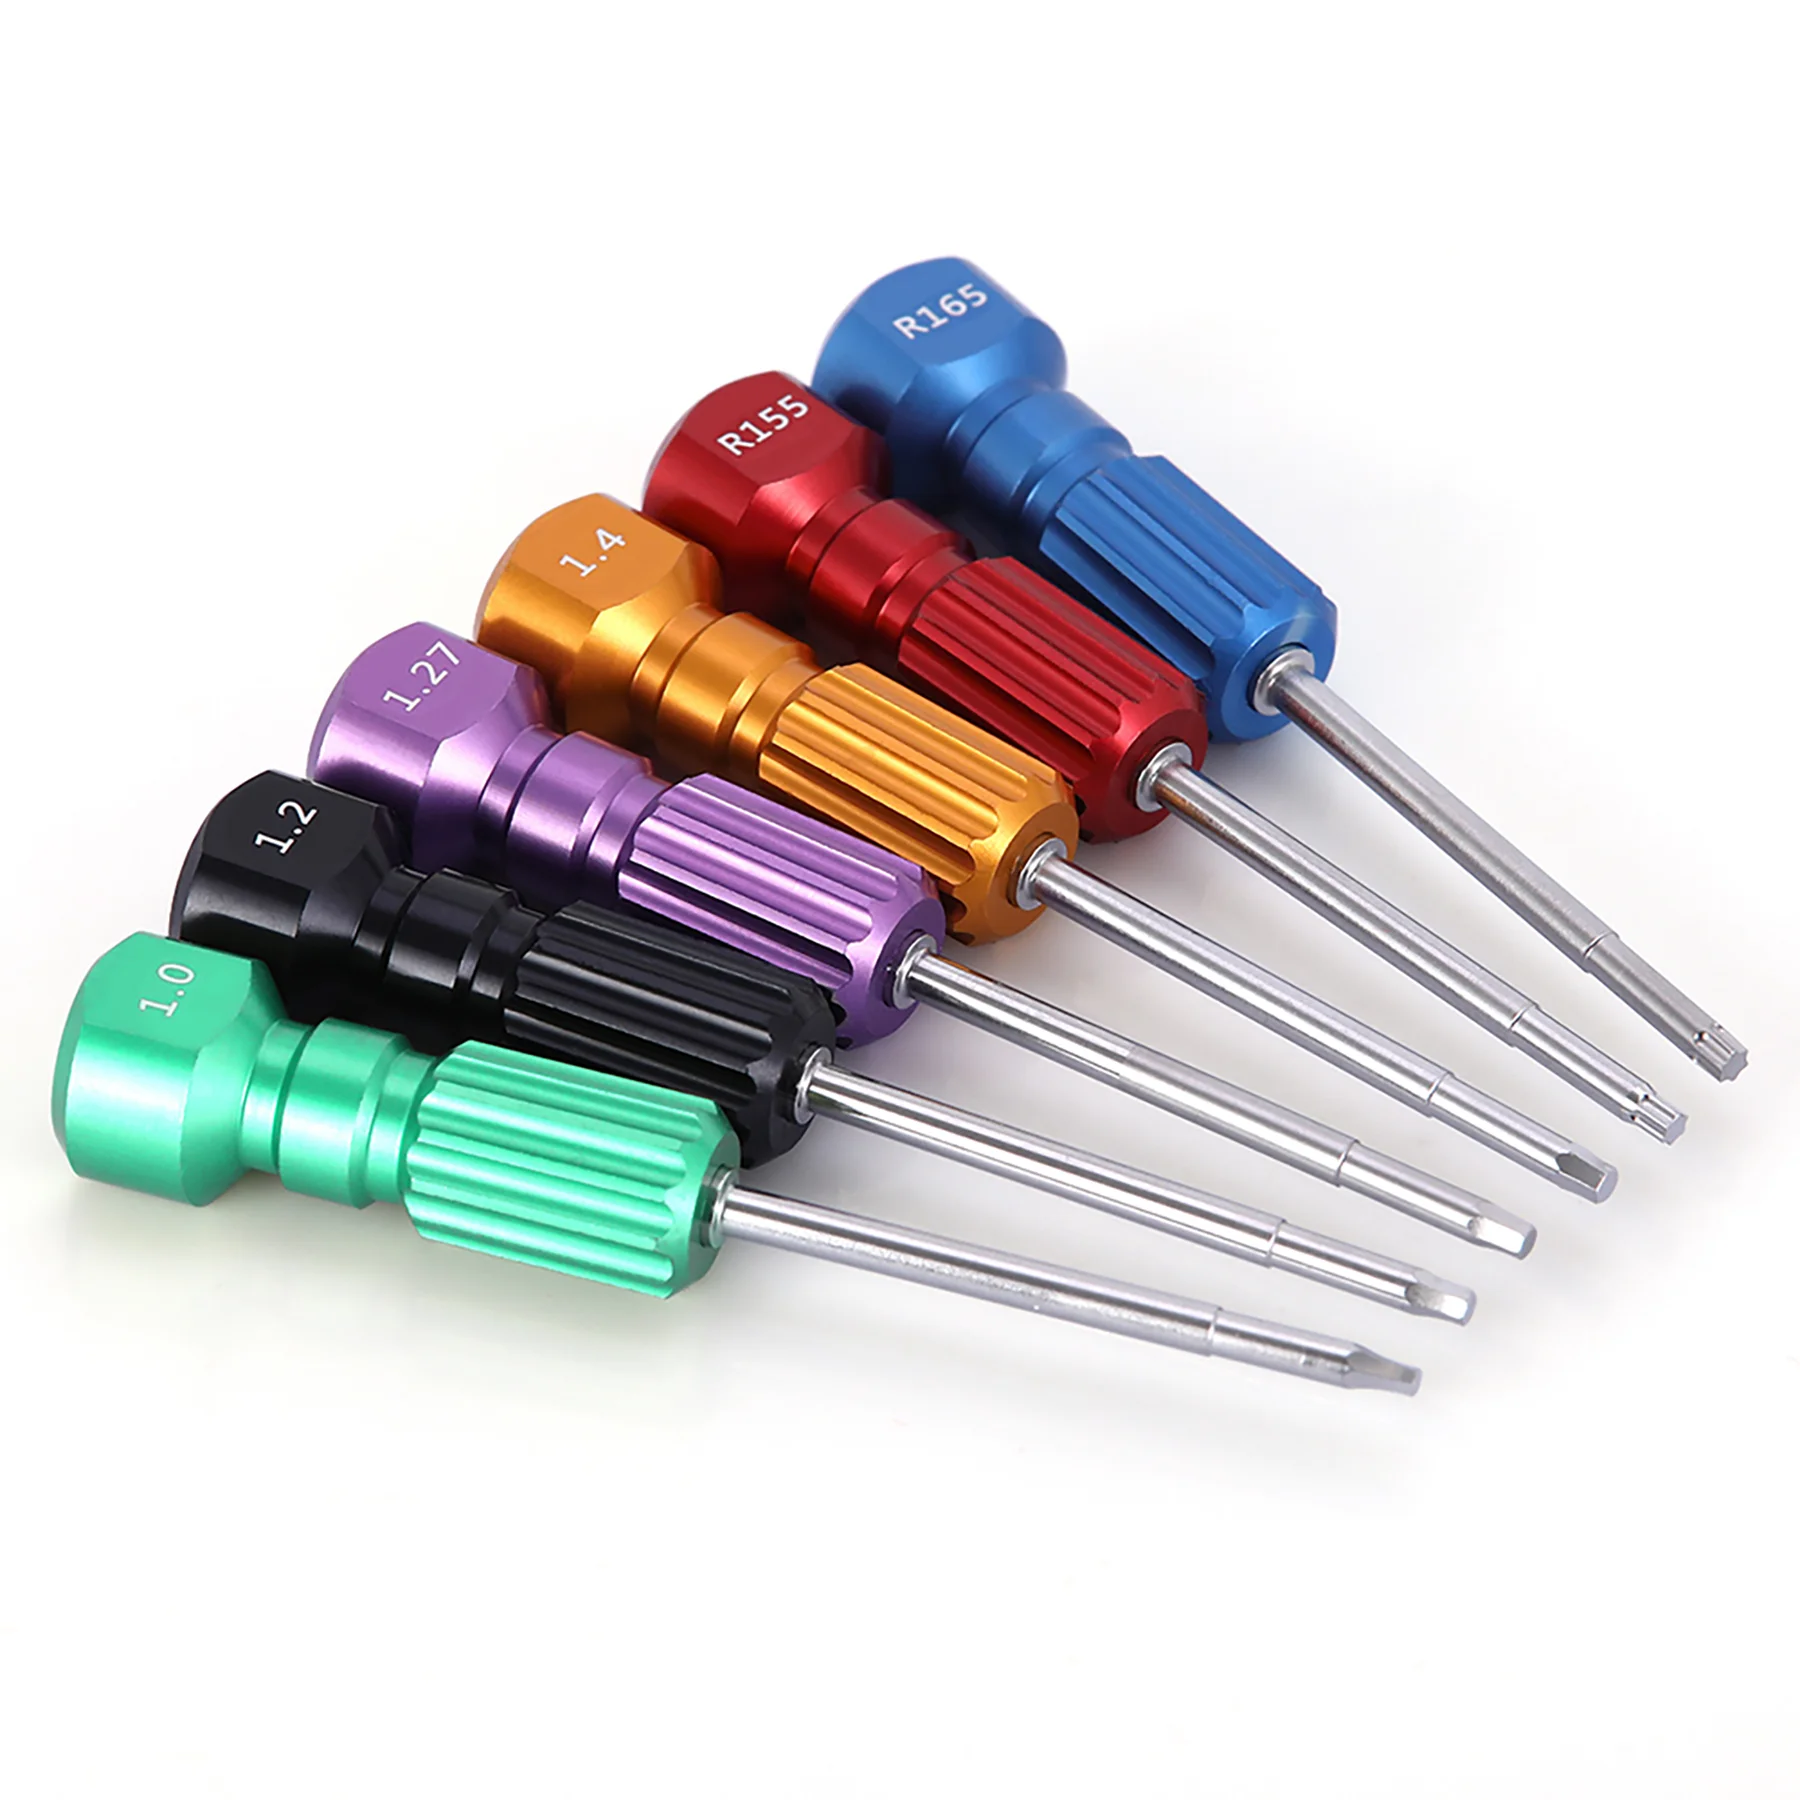 6Pcs Dental Implant Screw Driver Dentistry Tool Kit Screwdriver Dentist Laboratory Instrument jay beagle r surgical essentials of immediate implant dentistry